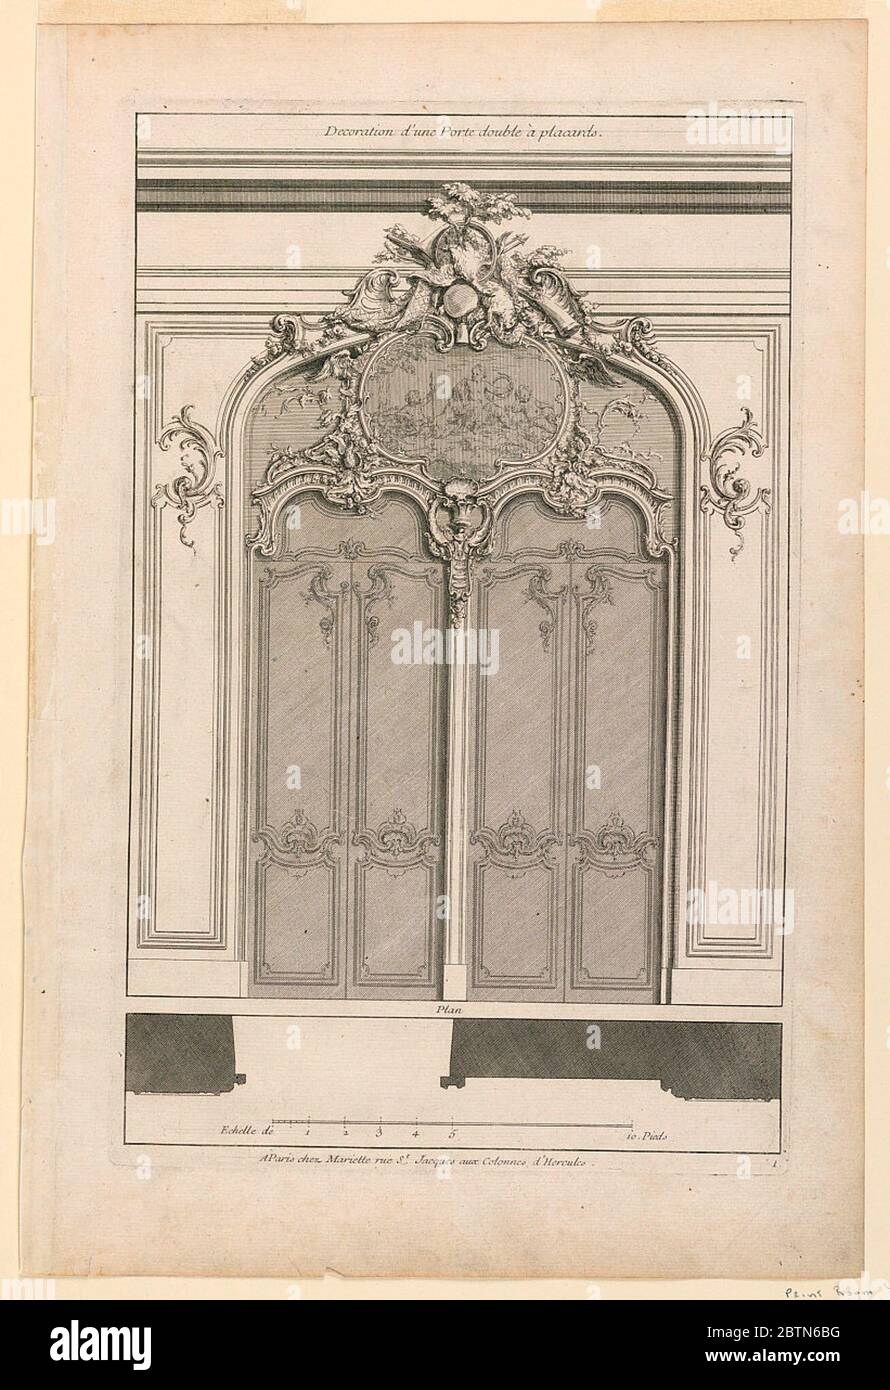 Plate 1 from a Set of 6 Decoration dune porte double placard. Research in ProgressTwo double doors in a joint arch. Both doors decorated in upper part with rocaille volutes. The area above decorated jointly. In center, a painting depicting putti in landscape. Above it, extending the door frame, carved trophies of hunt. Stock Photo